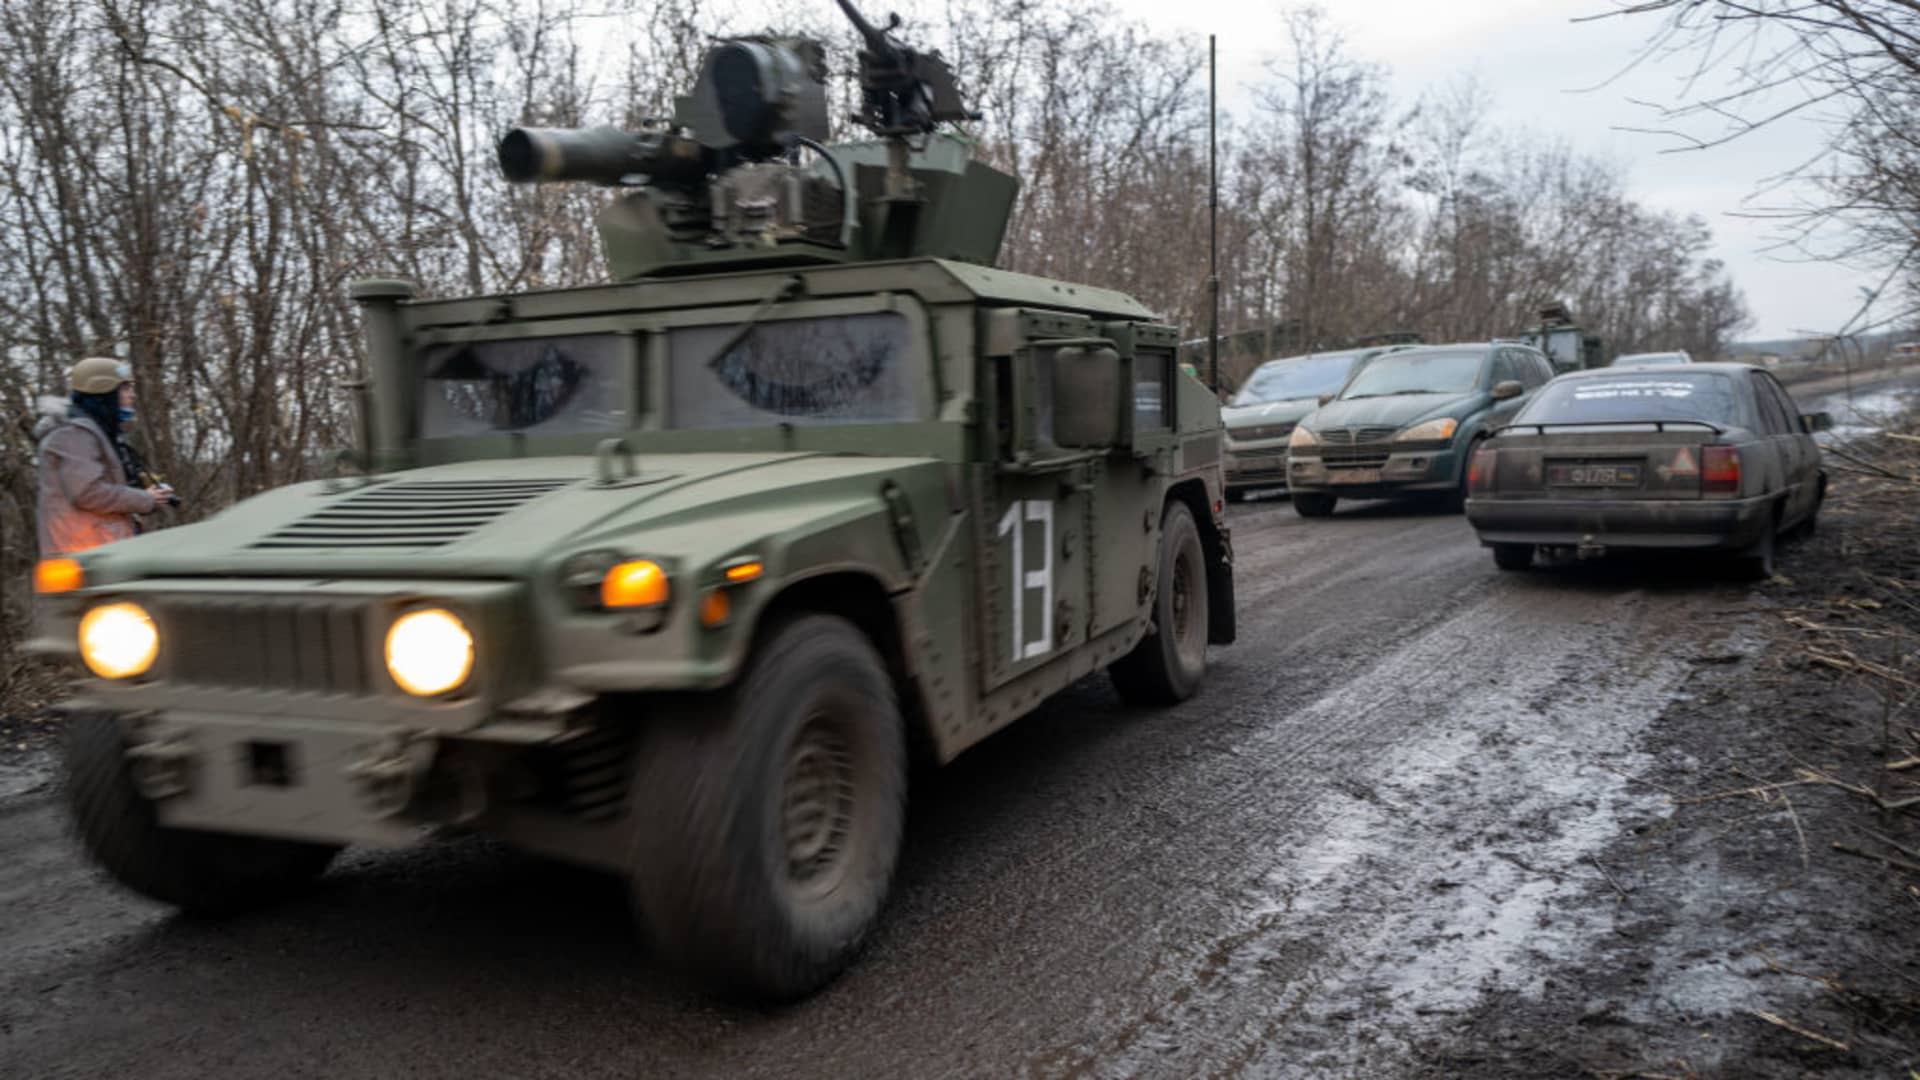 Russian forces are closing in on the strategic city of Bakhmut, giving Ukraine a tough choice to make